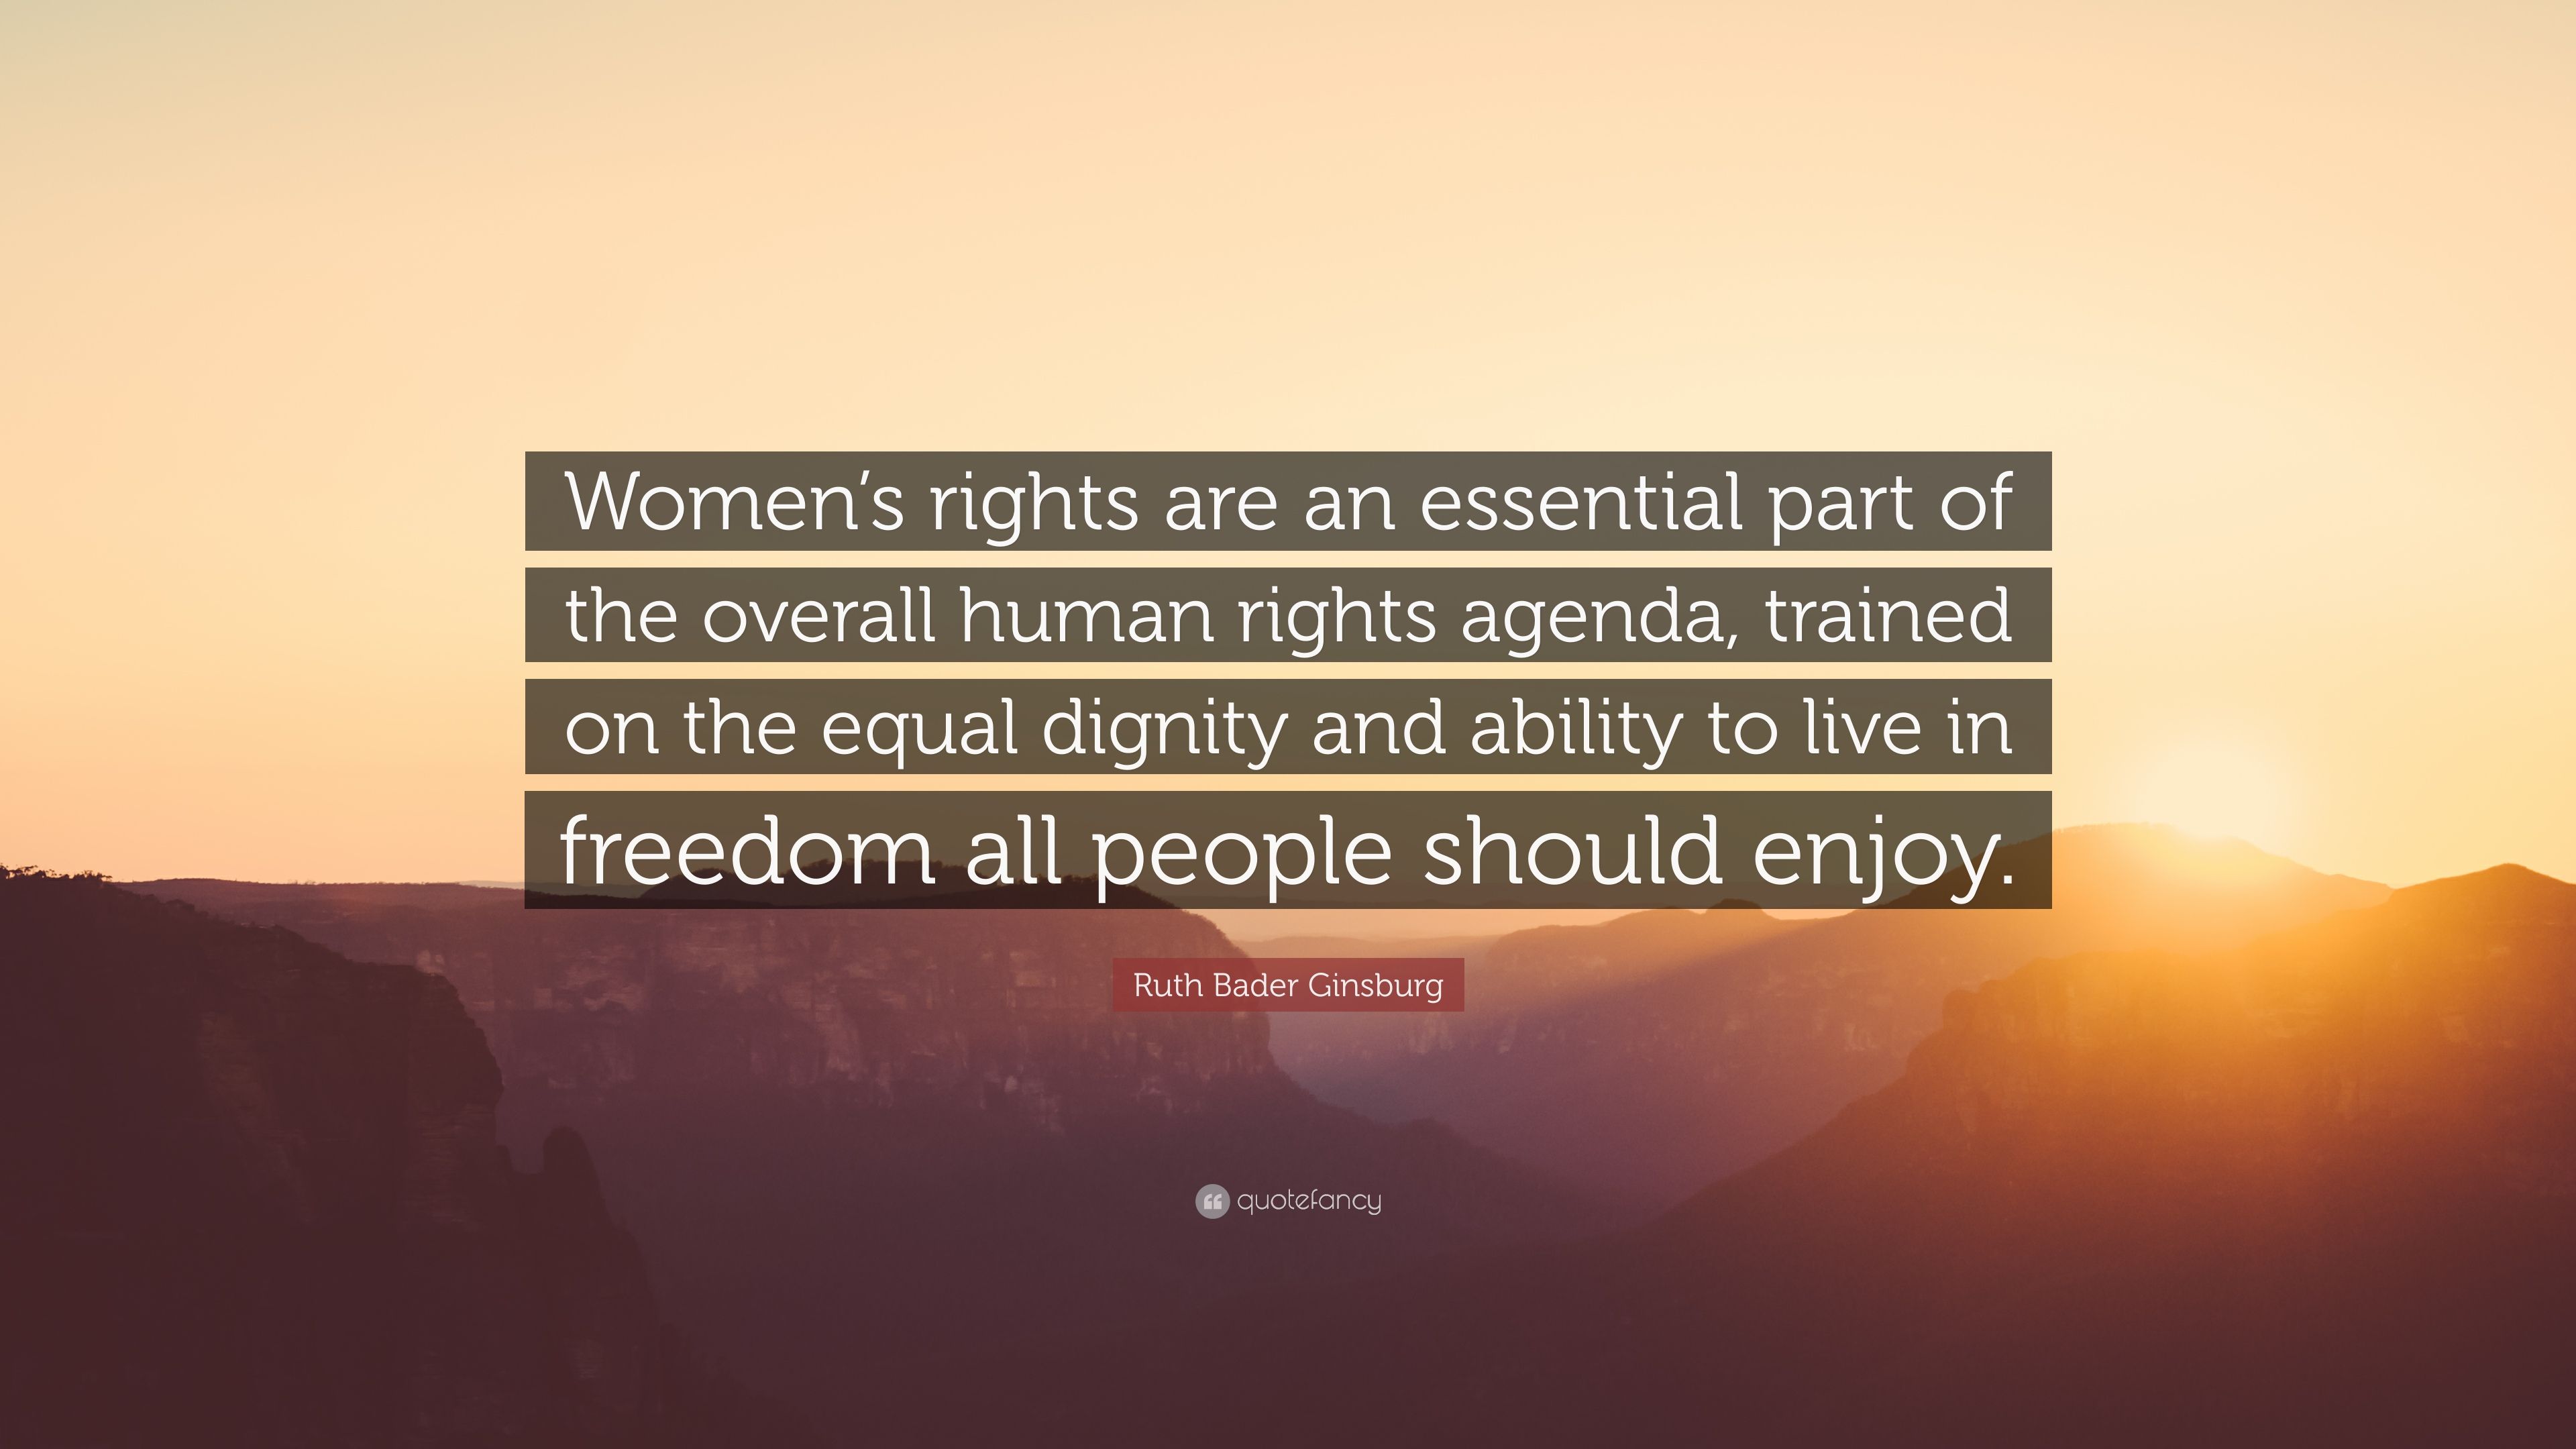 Ruth Bader Ginsburg Quote: “Women's rights are an essential part